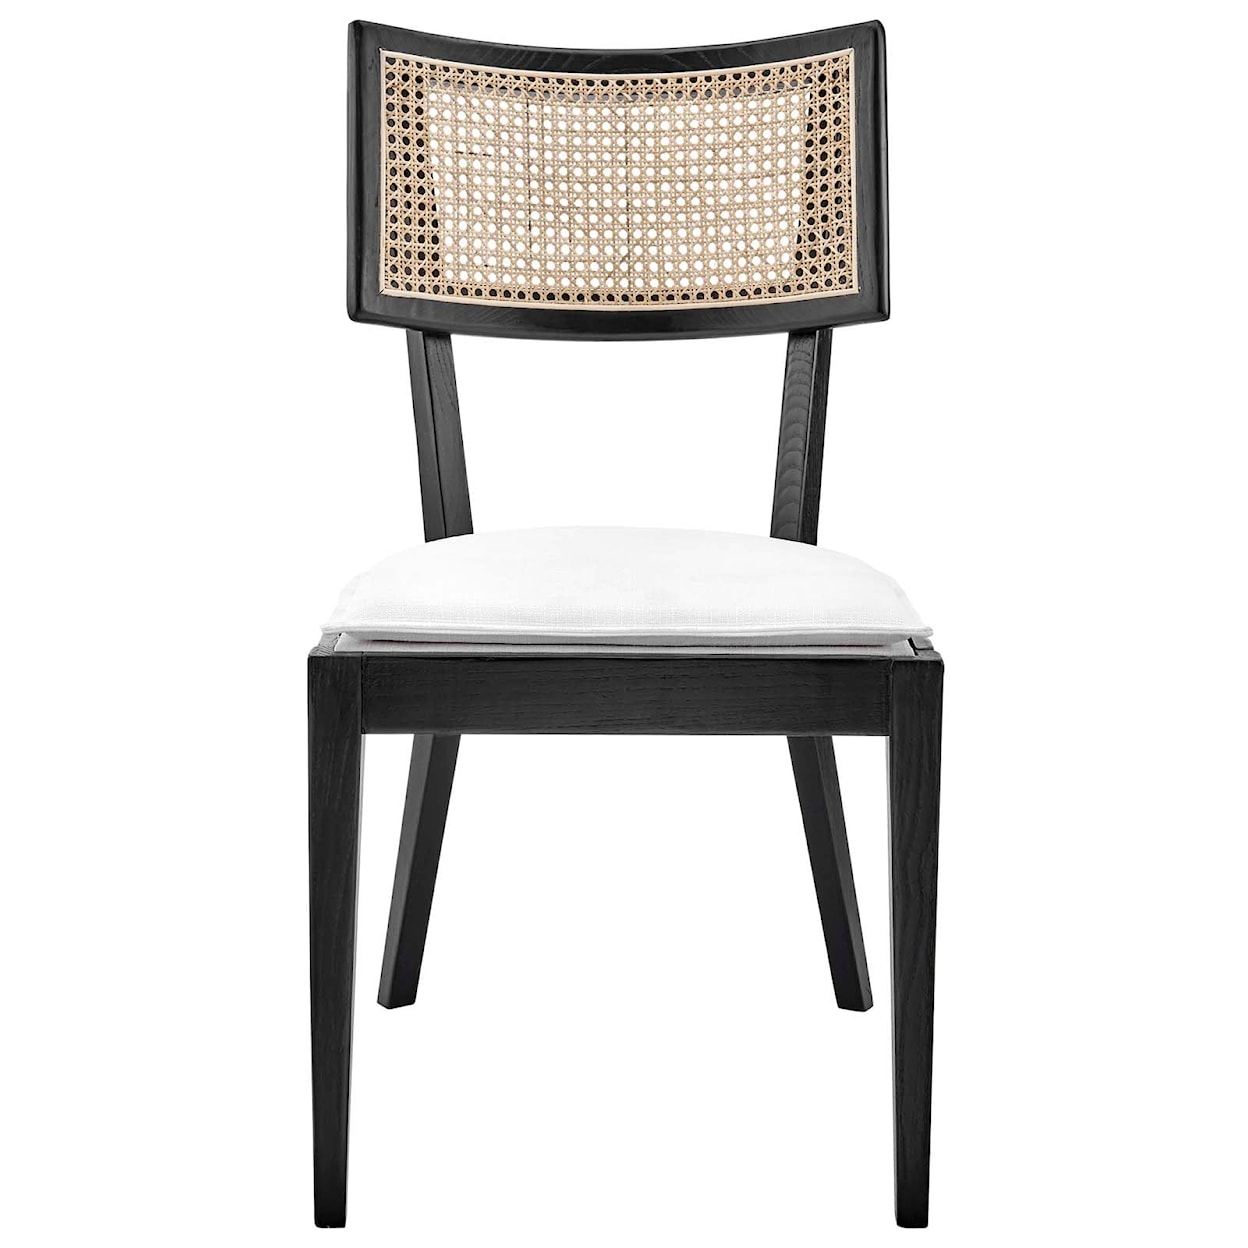 Modway Caledonia Caledonia Wood Dining Chair